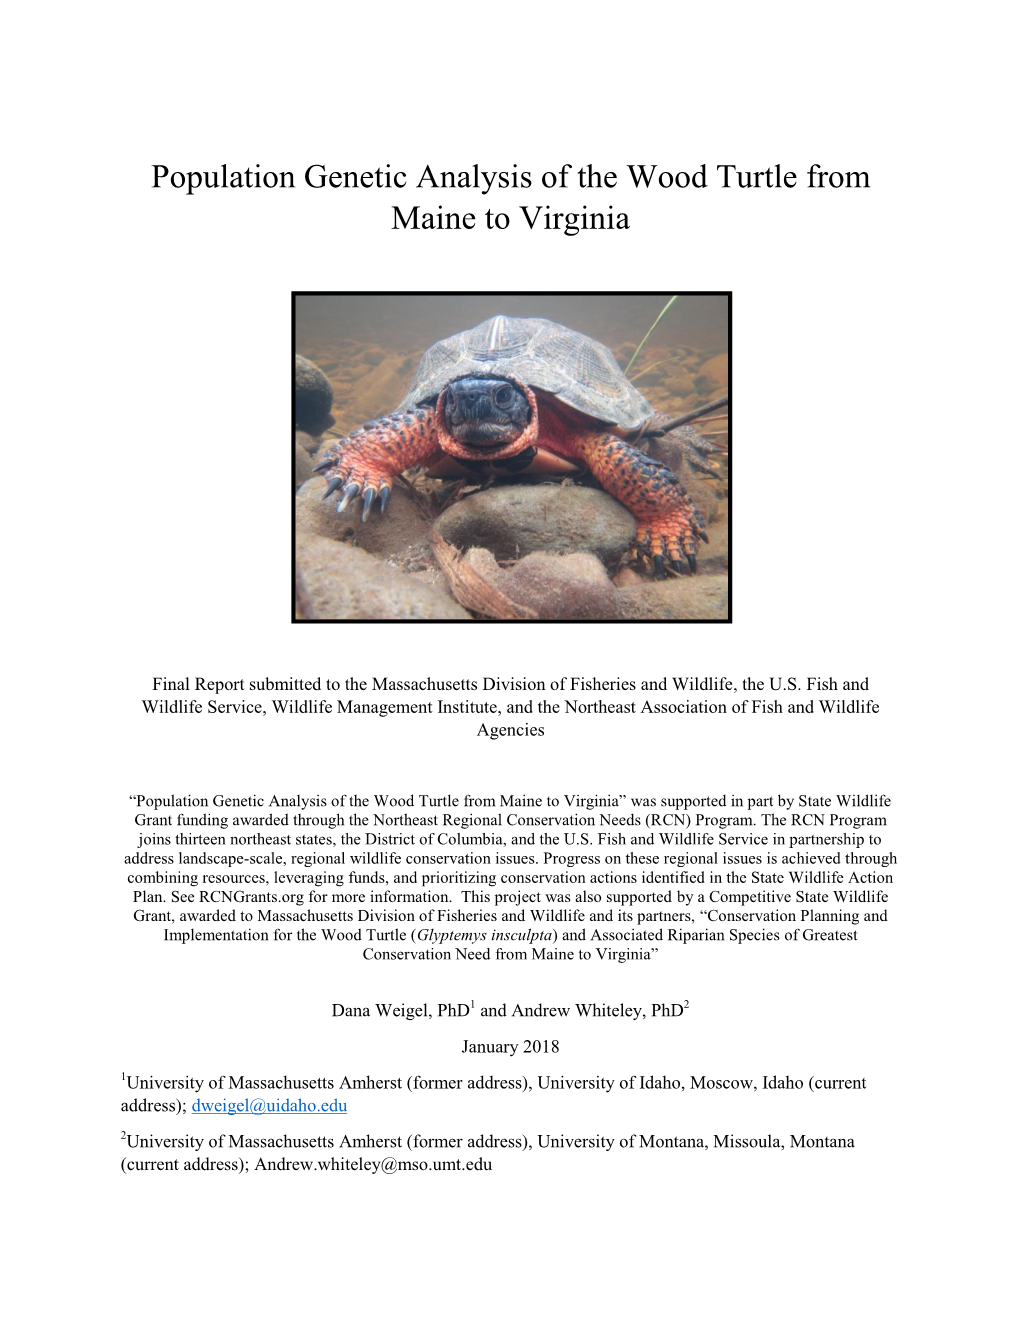 Population Genetic Analysis of the Wood Turtle from ME to VA